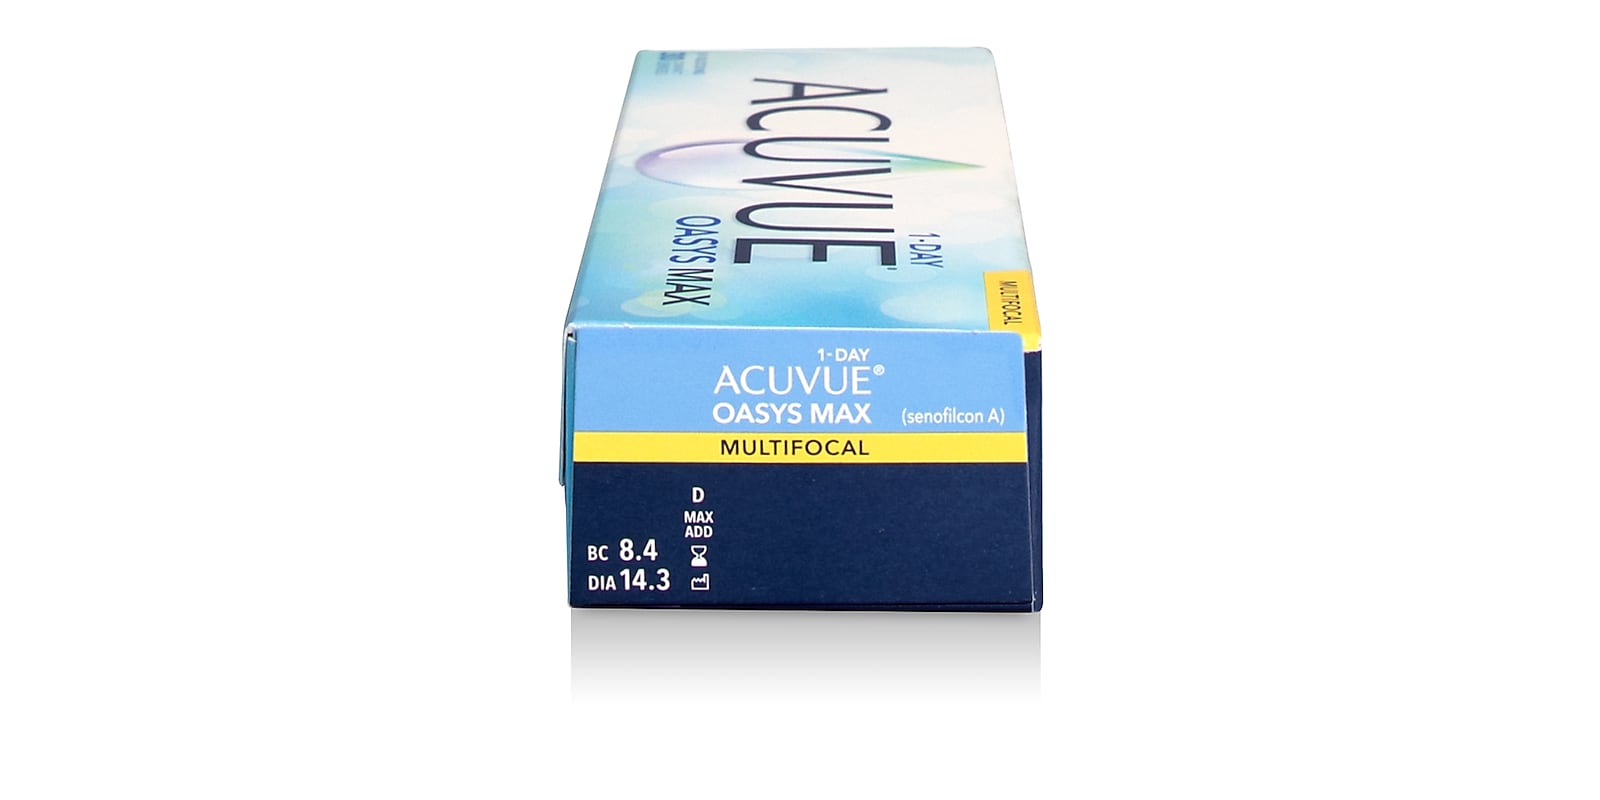 acuvue-oasys-max-1-day-multifocal-90-pack-contactsdirect